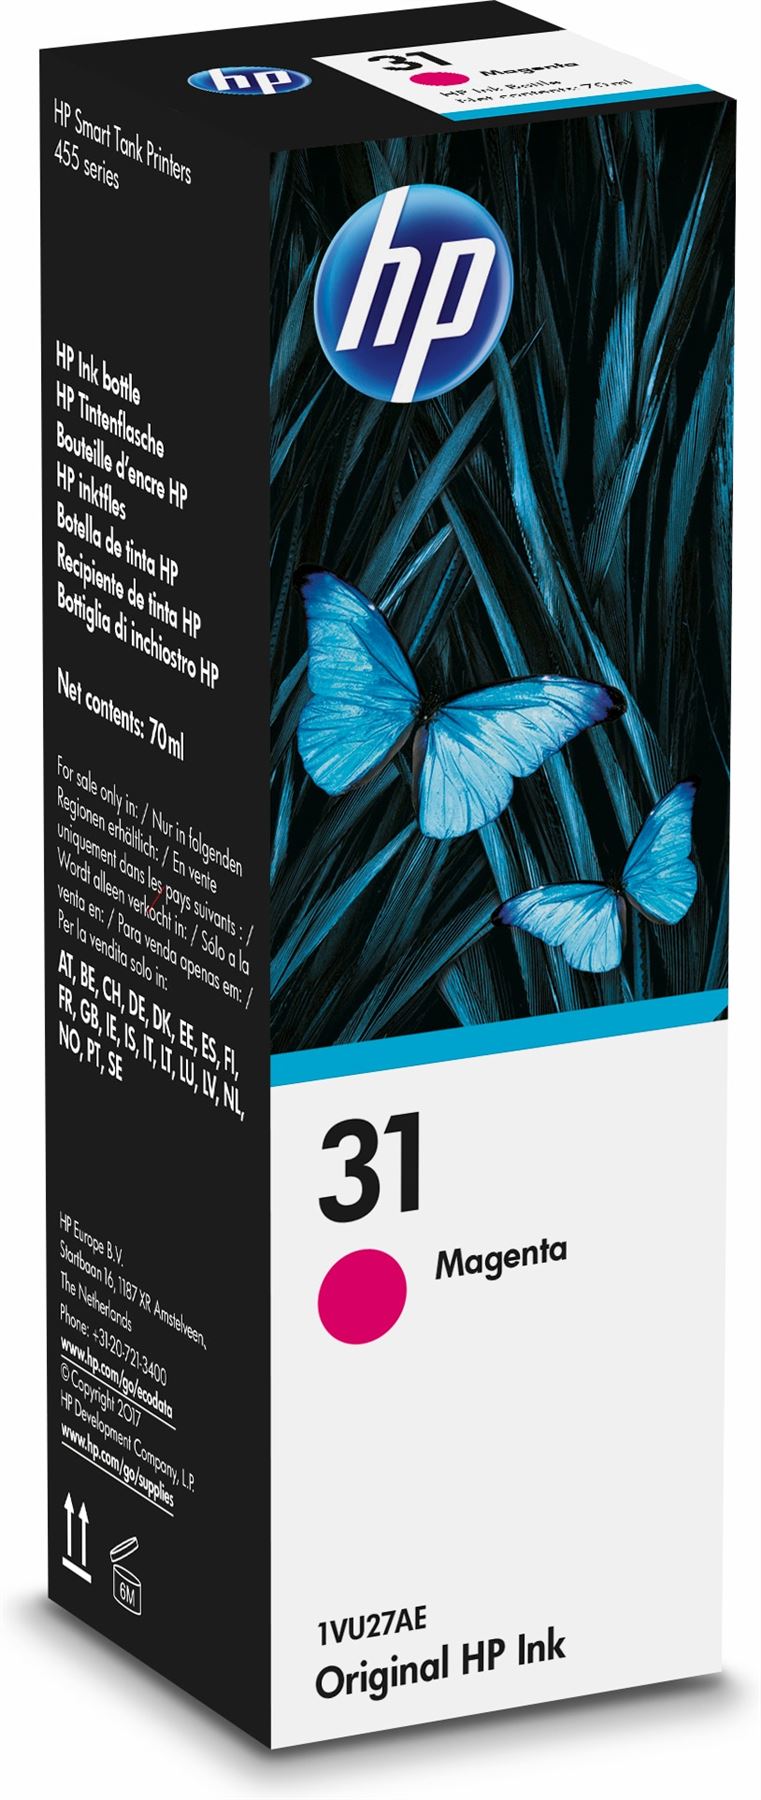 HP 1VU27AE/31 Ink cartridge magenta, 8K pages 70ml for HP Smart Tank Plus 555/Wireless 455/7005